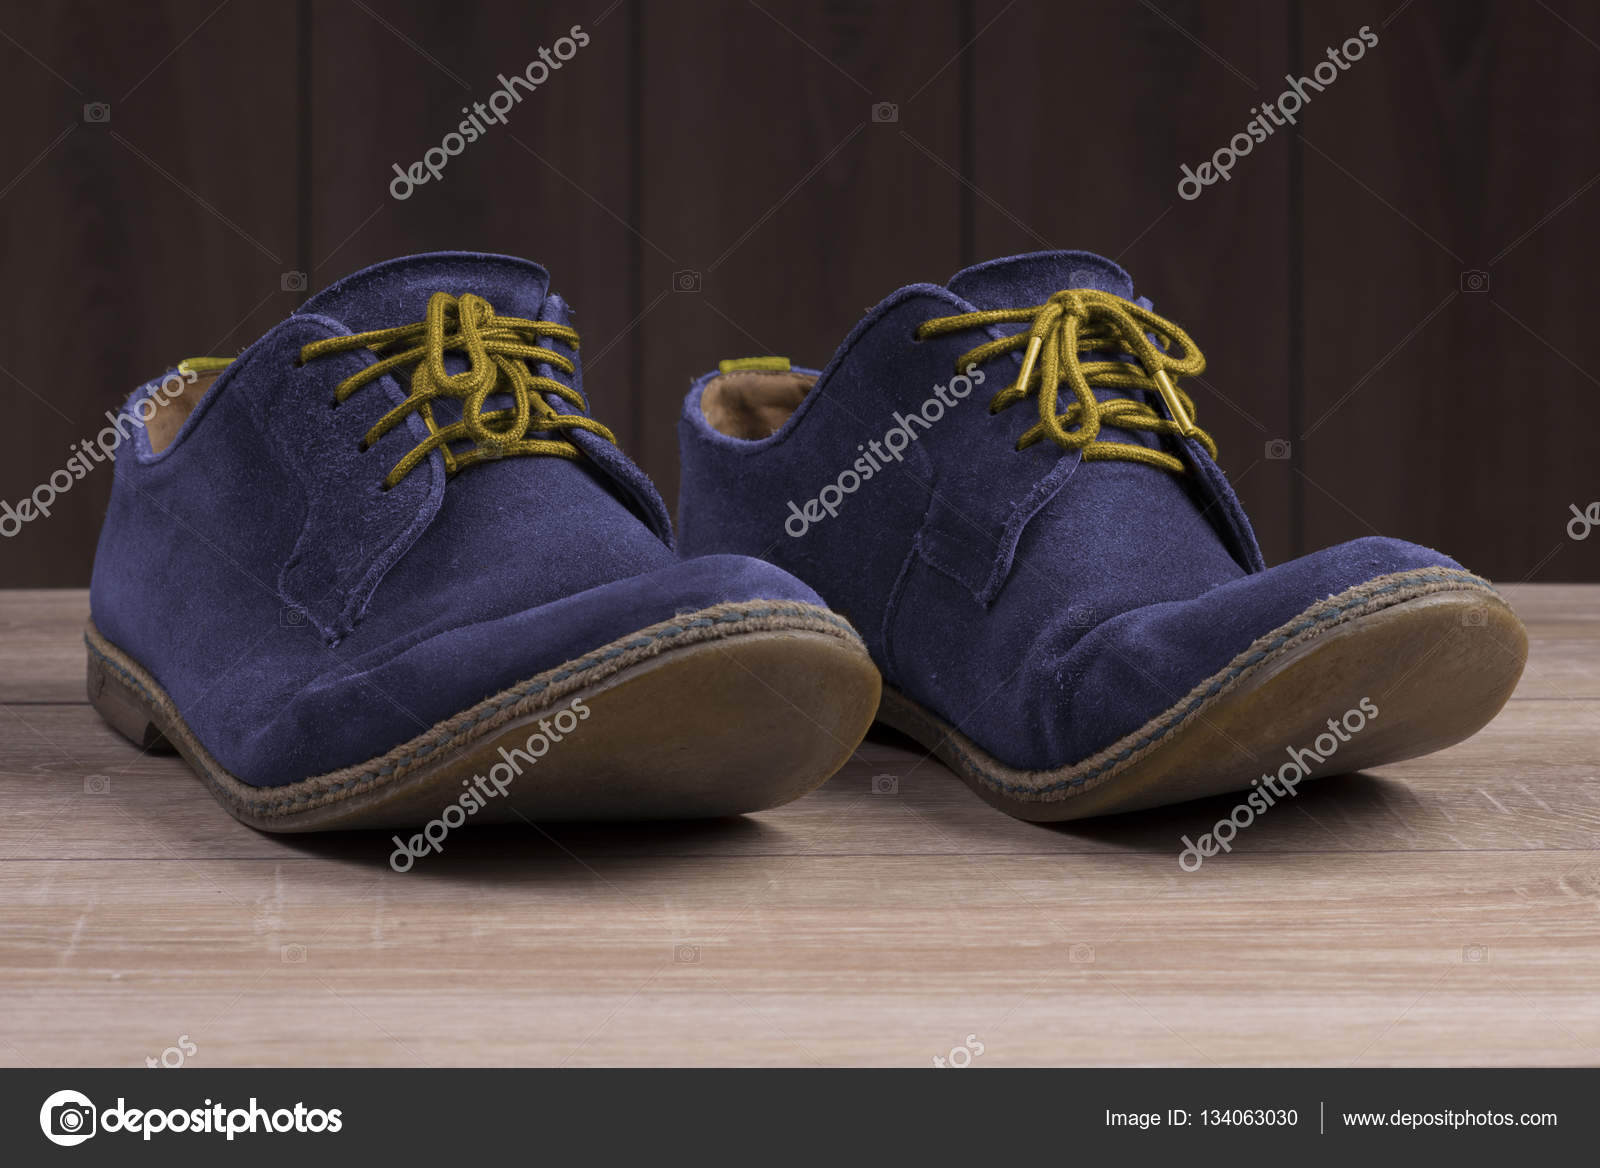 blue suede shoes brand